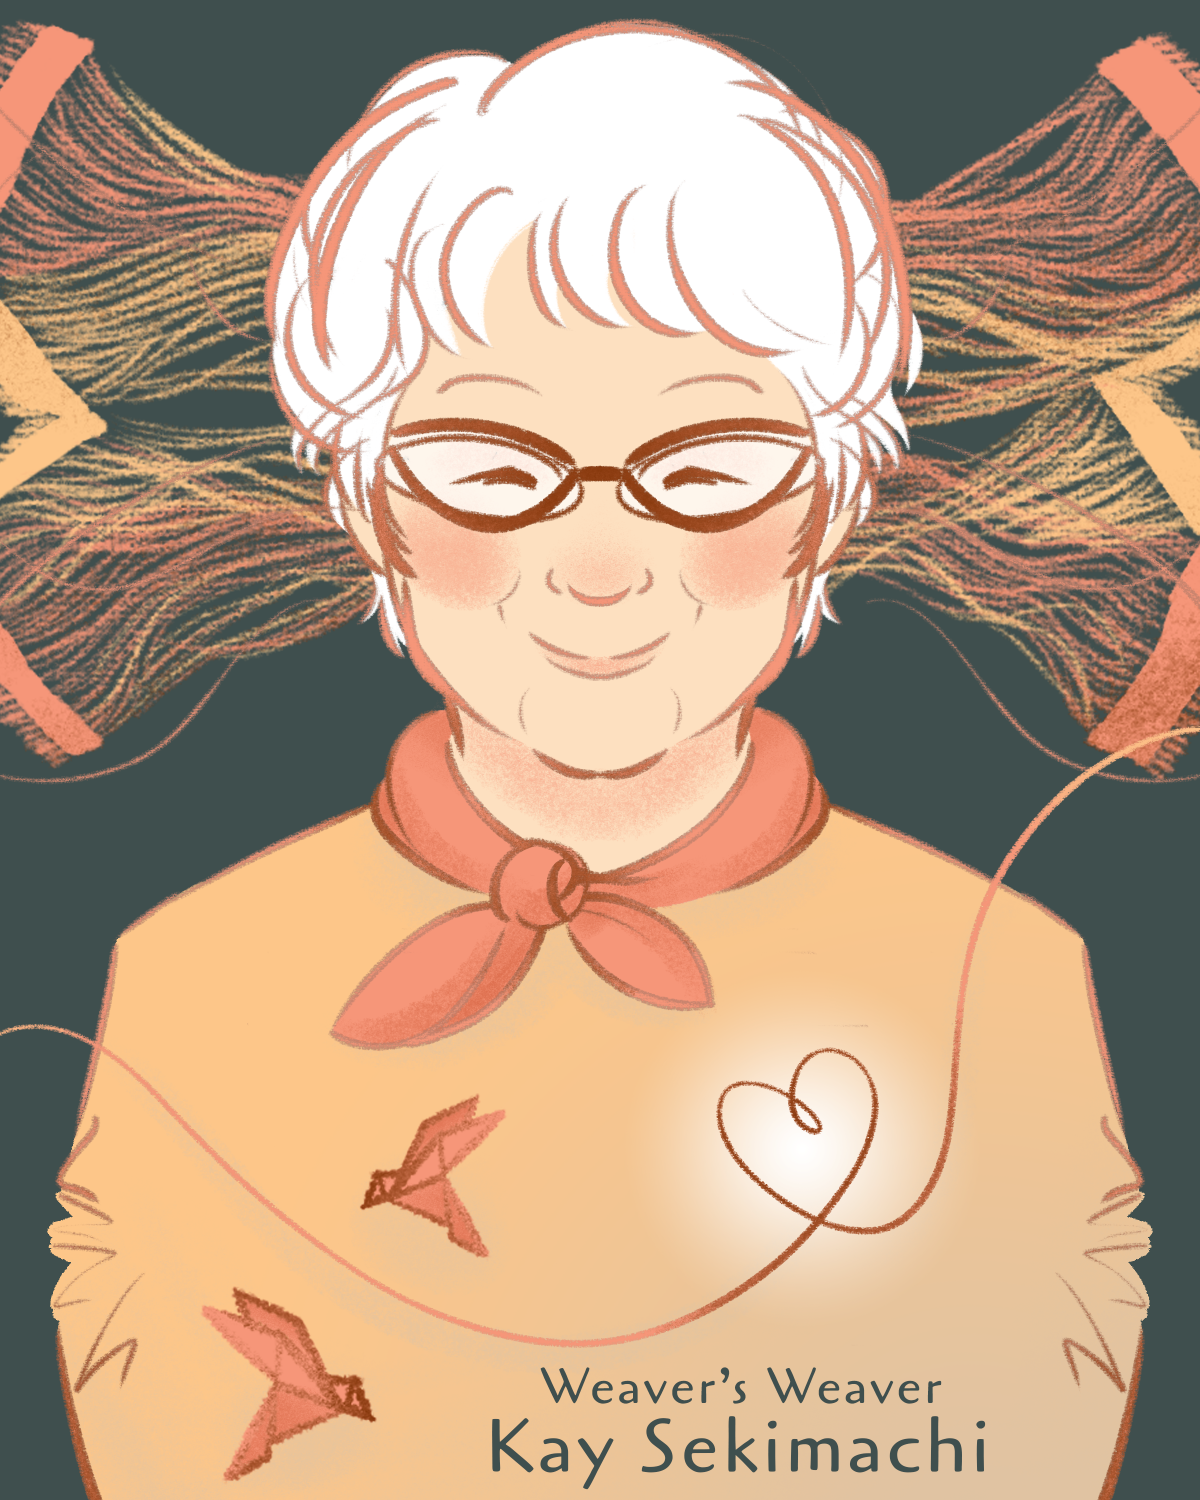 The cover of a comic book with the title "A Weaver's Weaver." It shows an older woman surrounded by thread. She has white hair and a slight smile.